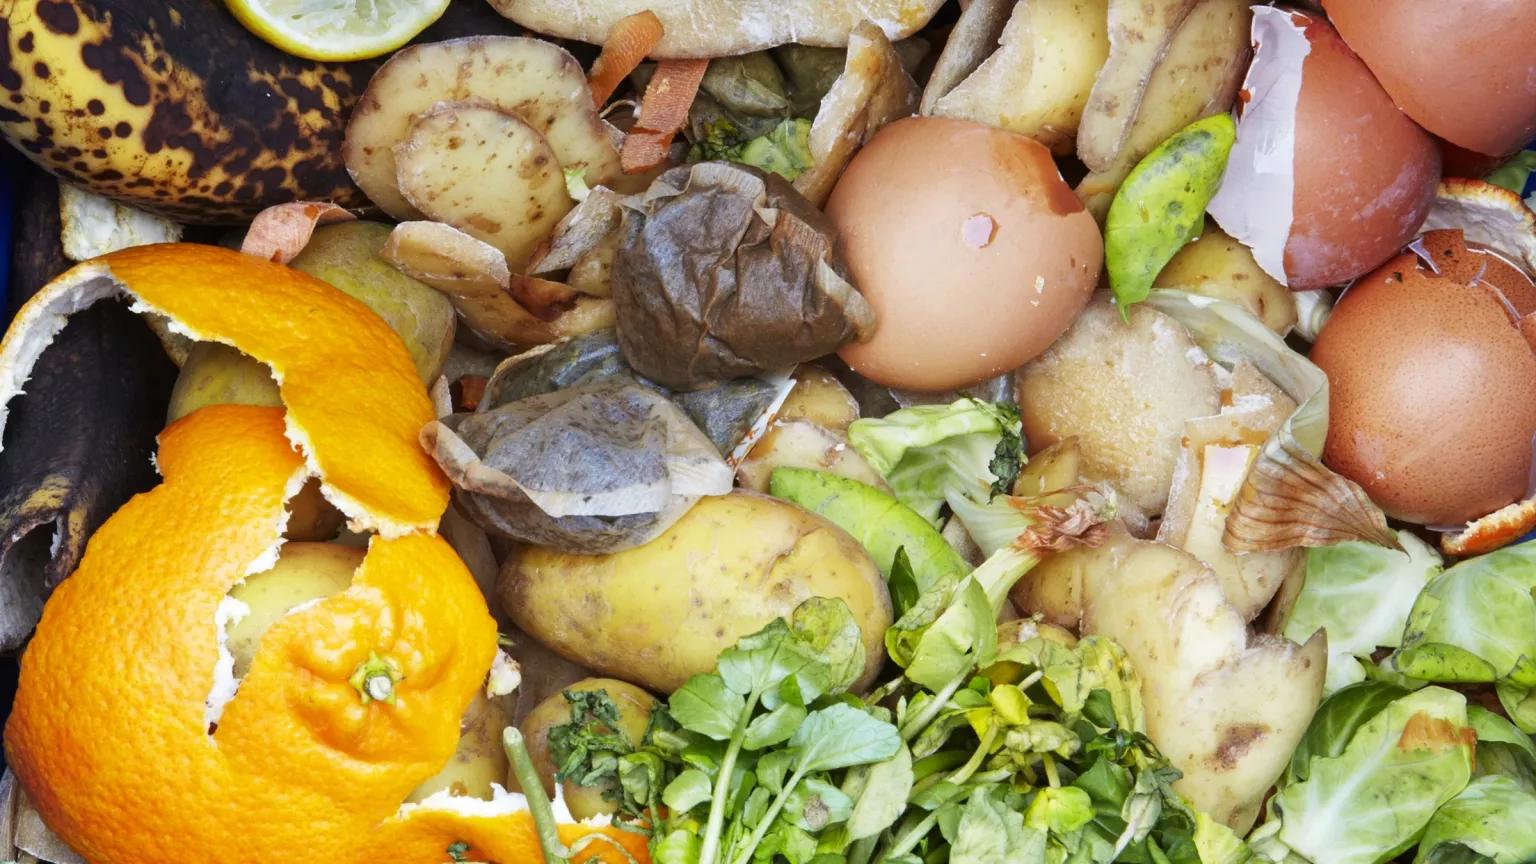 A clos-up view of scraps of fruits and vegetables, including orange and banana peel, leafy greens, and potato